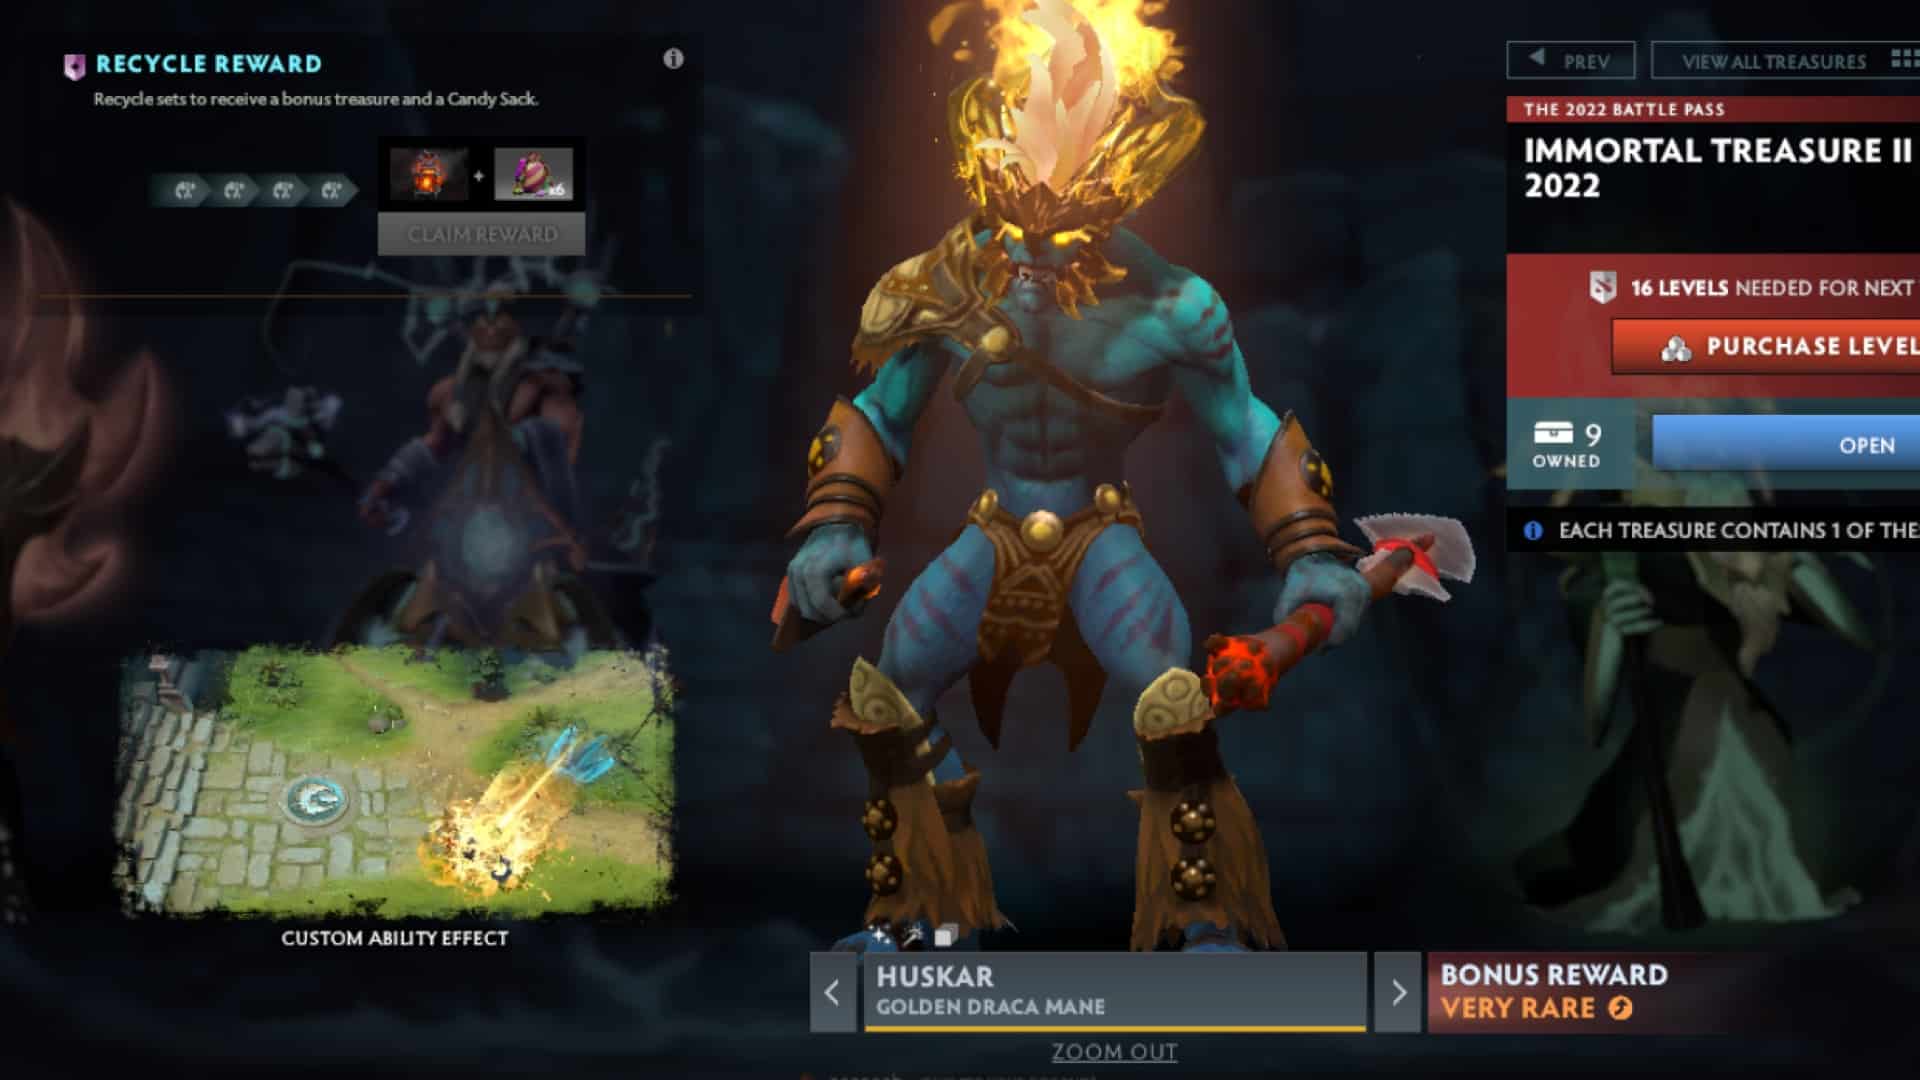 Huskar fights opponents after disarming them with Inner Fire